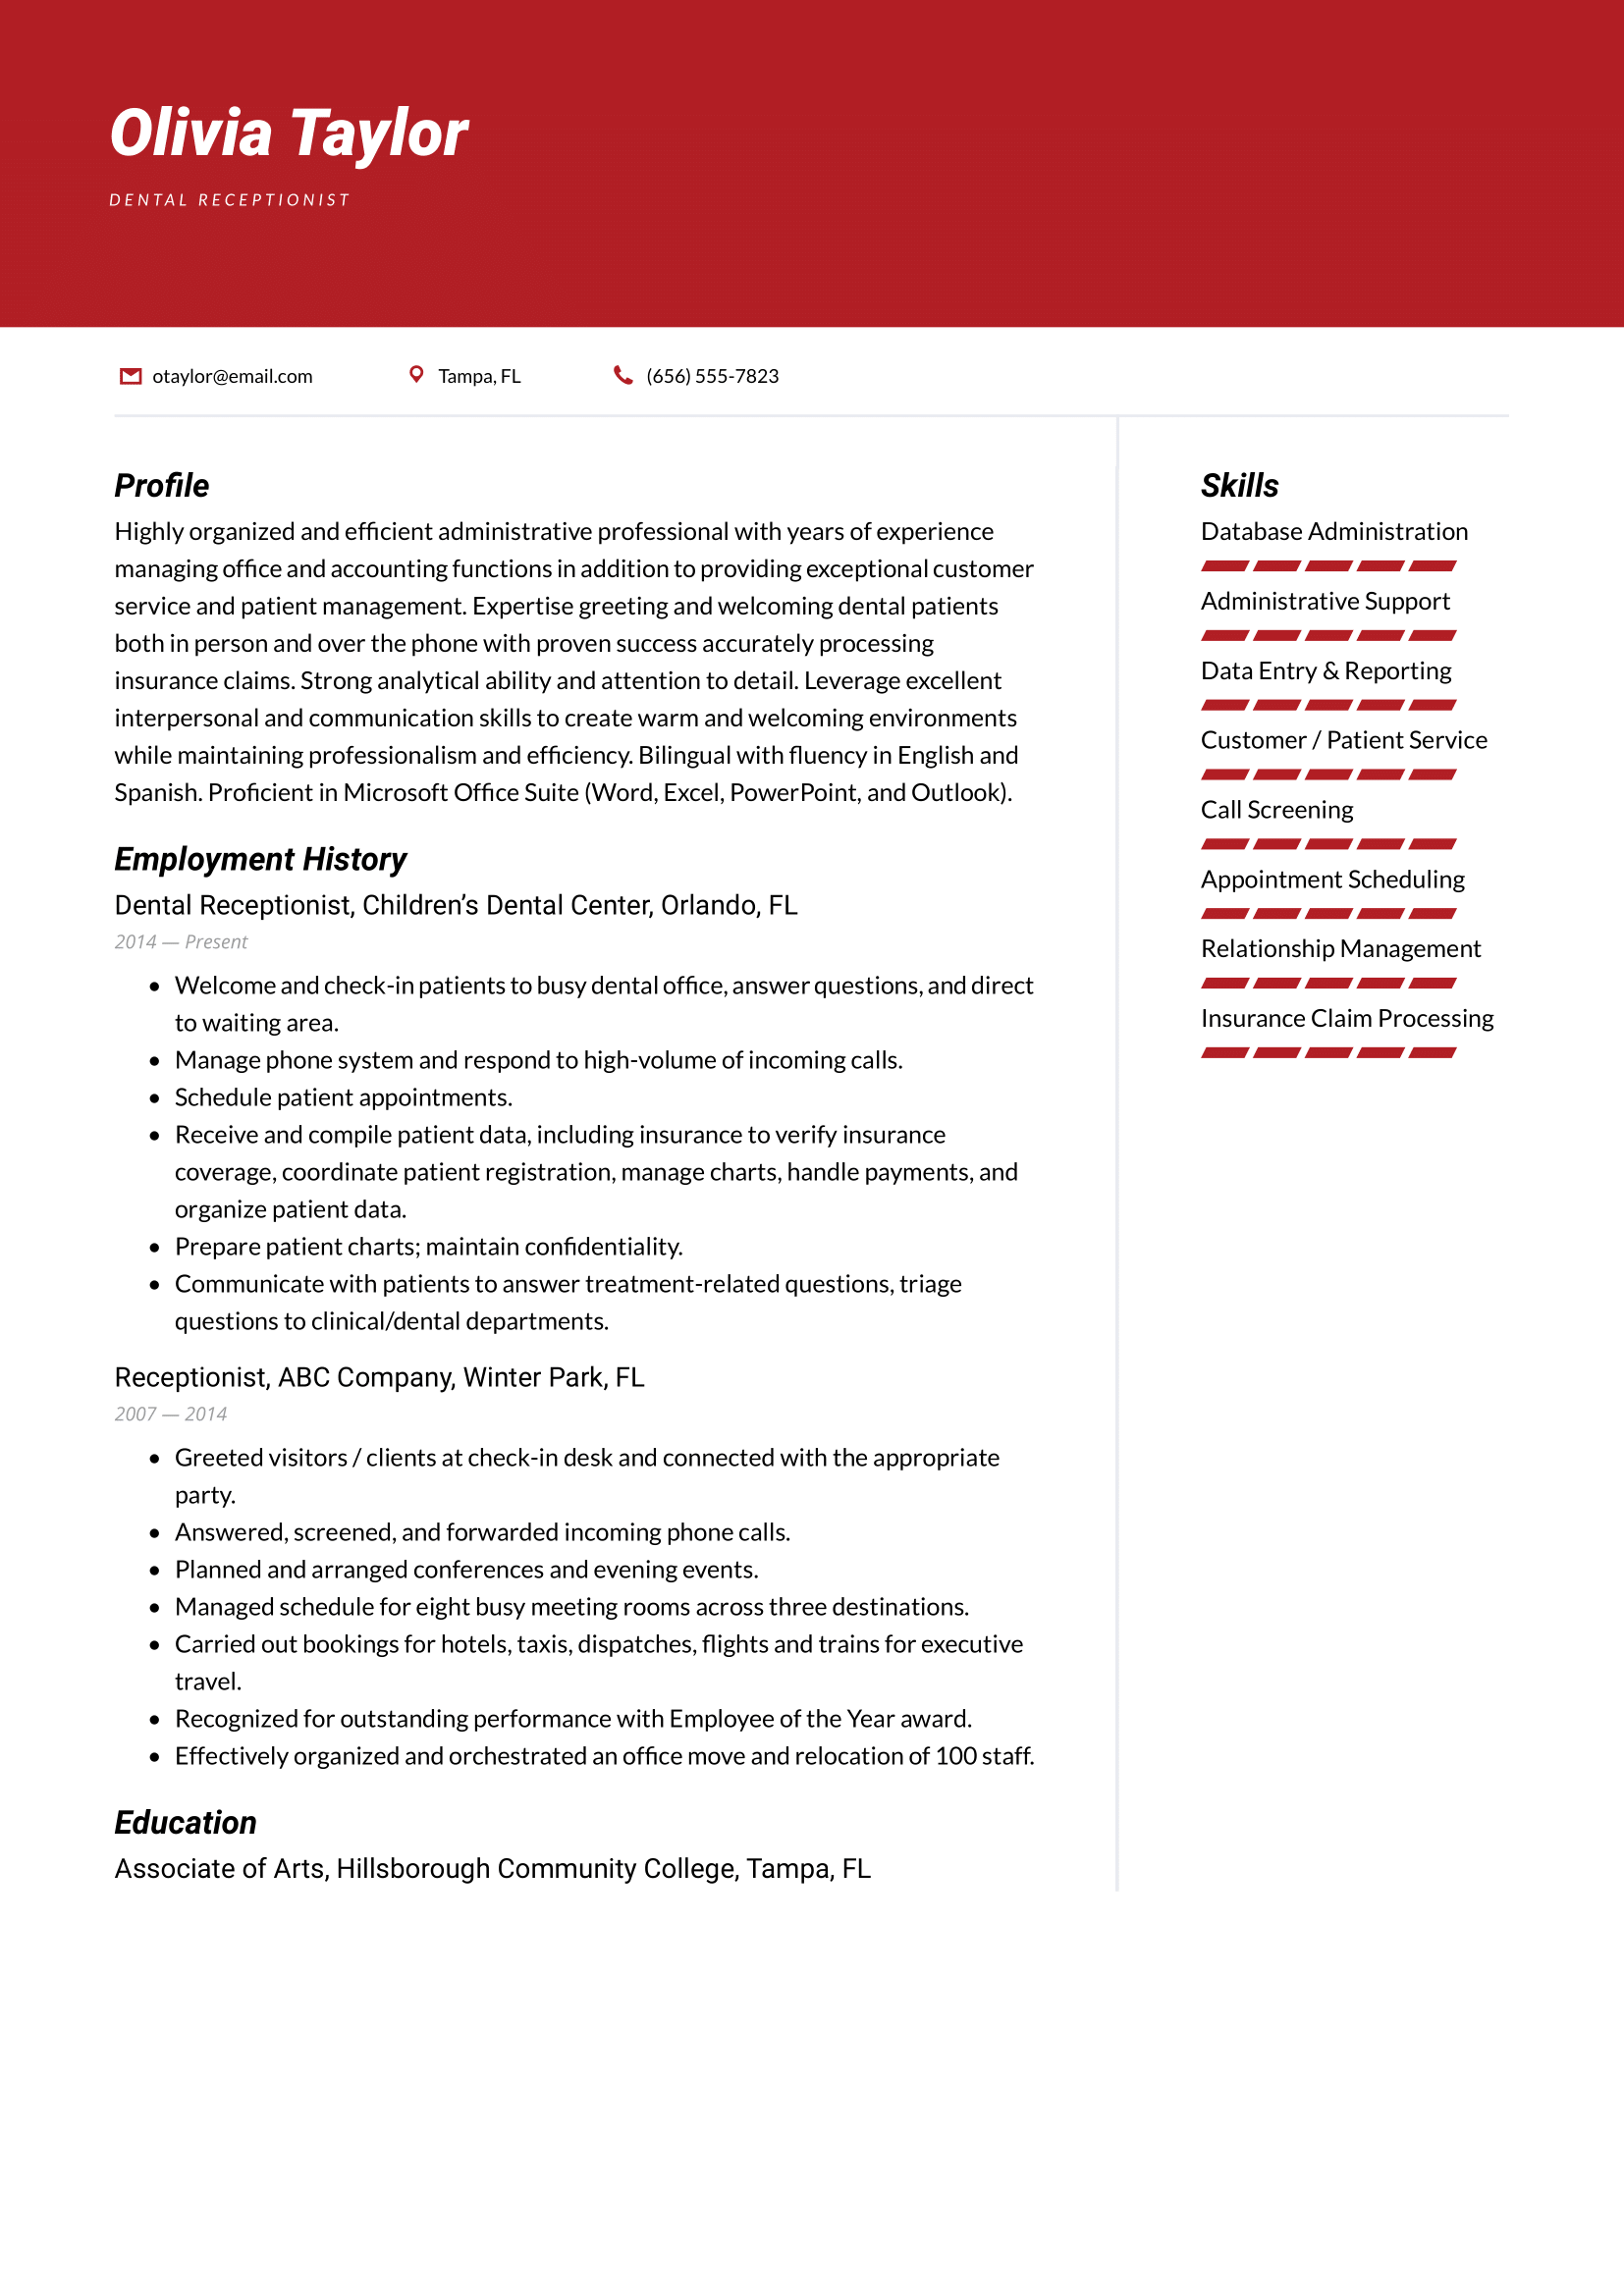 Dental_Receptionist-Resume-Example.png